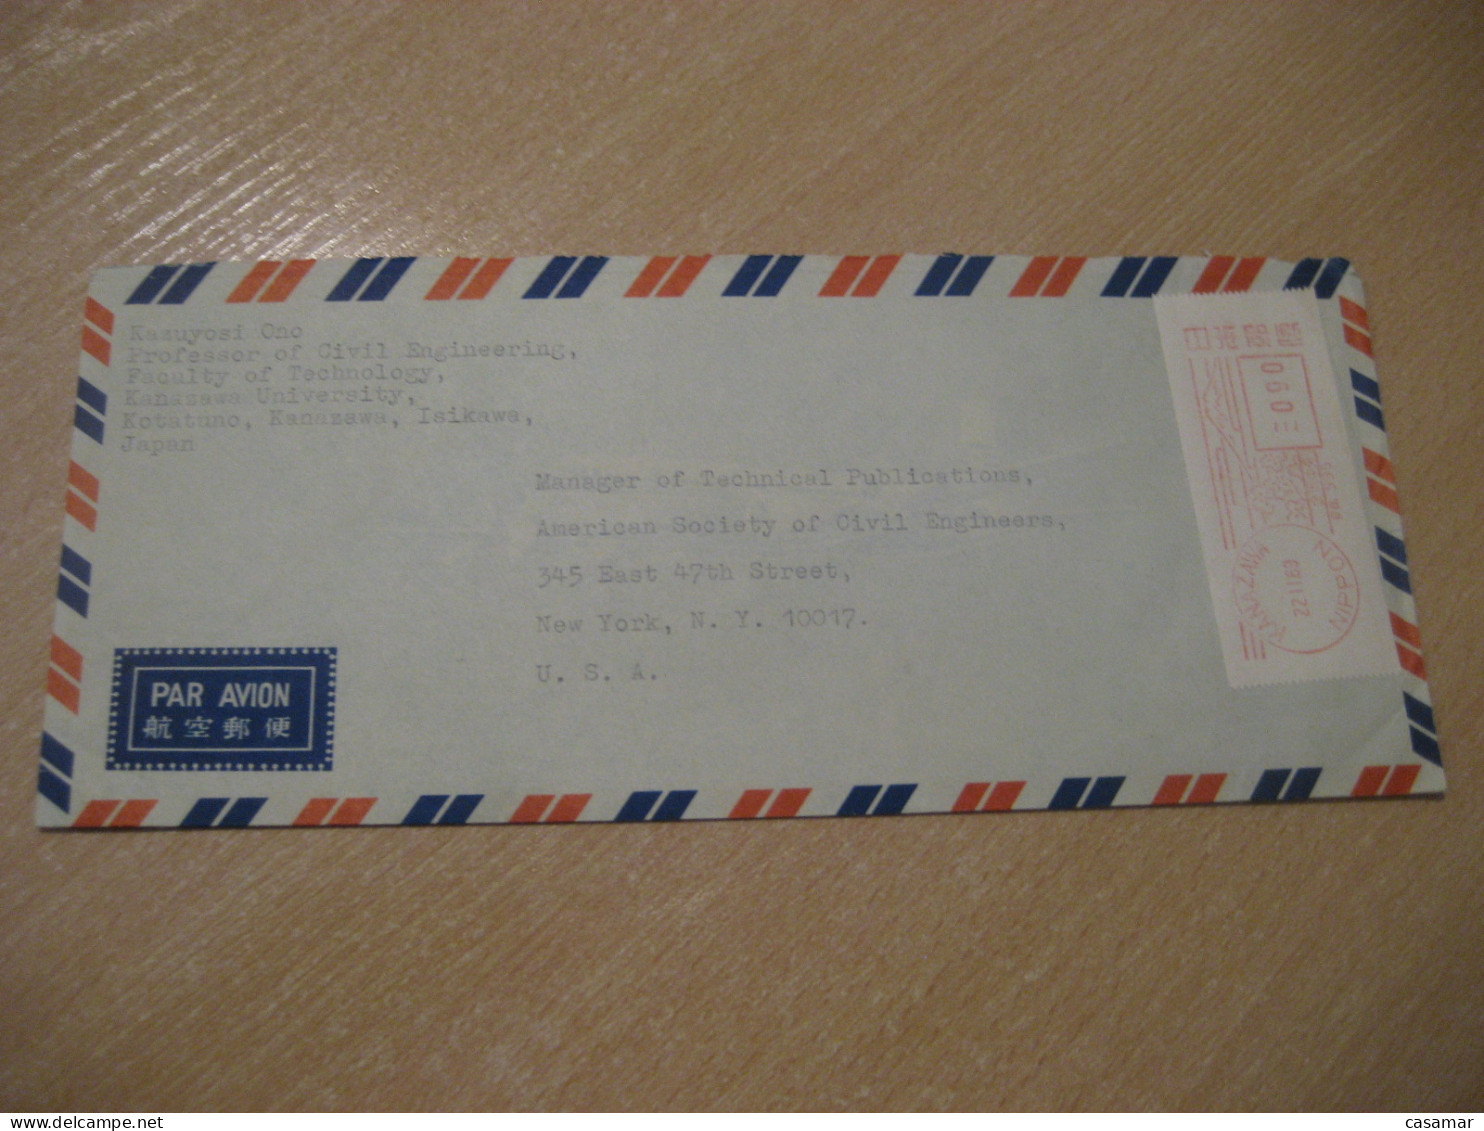 KANAZAWA 1969 To NY USA Vulcanologia Volcanology Volcano Volcan Geology Geologie Meter Mail Cancel Cover JAPAN - Volcans